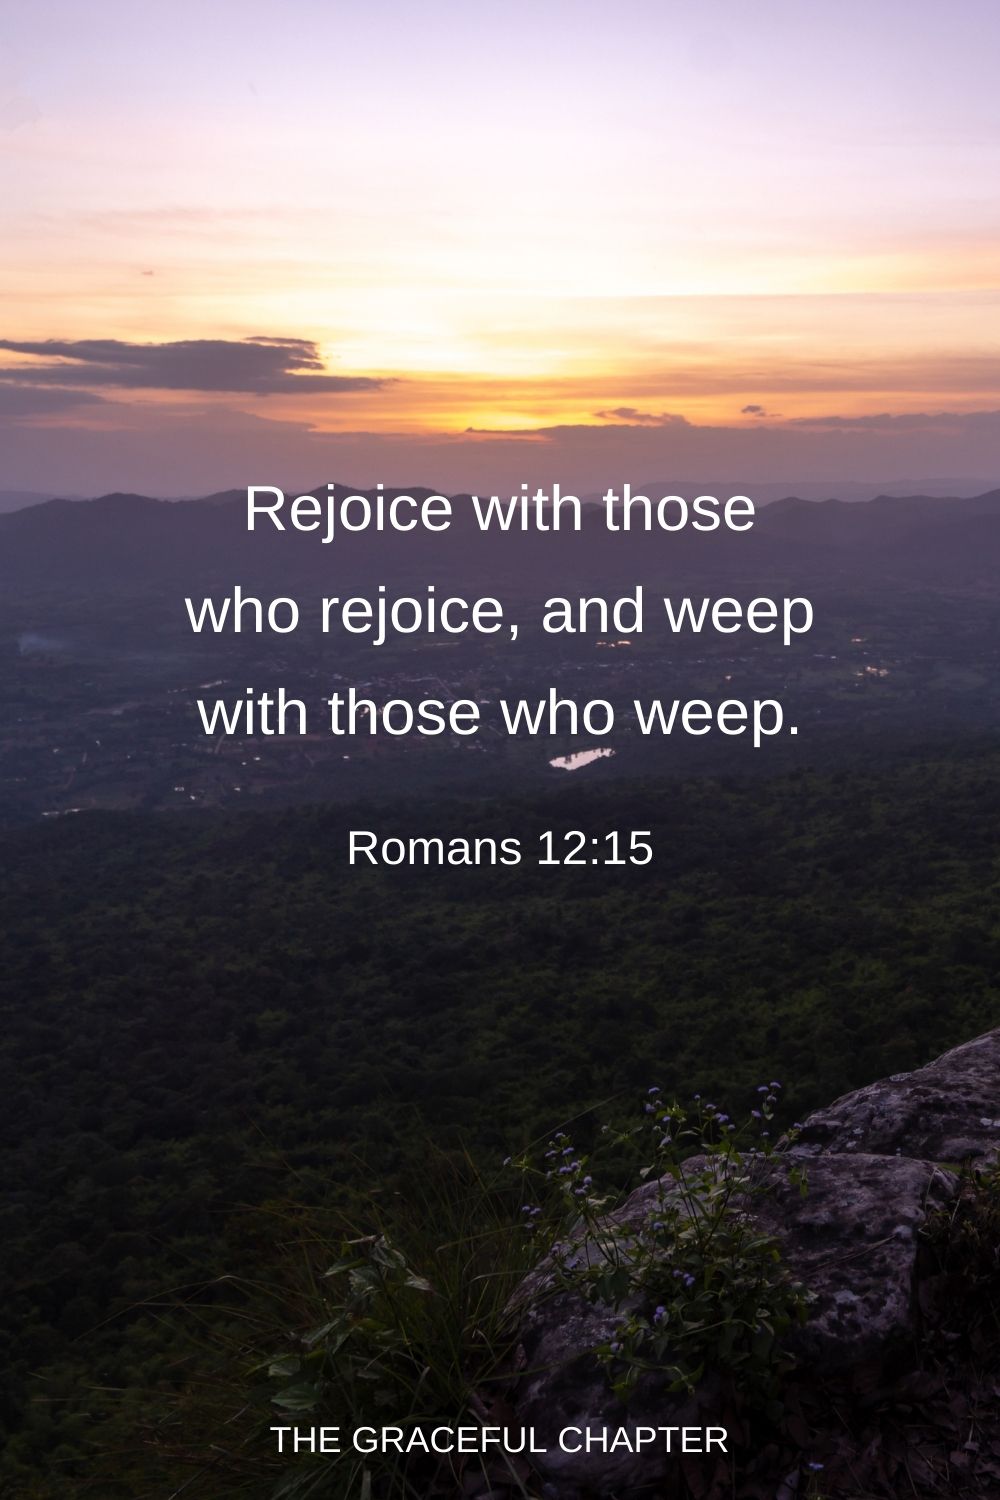 Rejoice with those who rejoice, and weep with those who weep. Romans 12:15